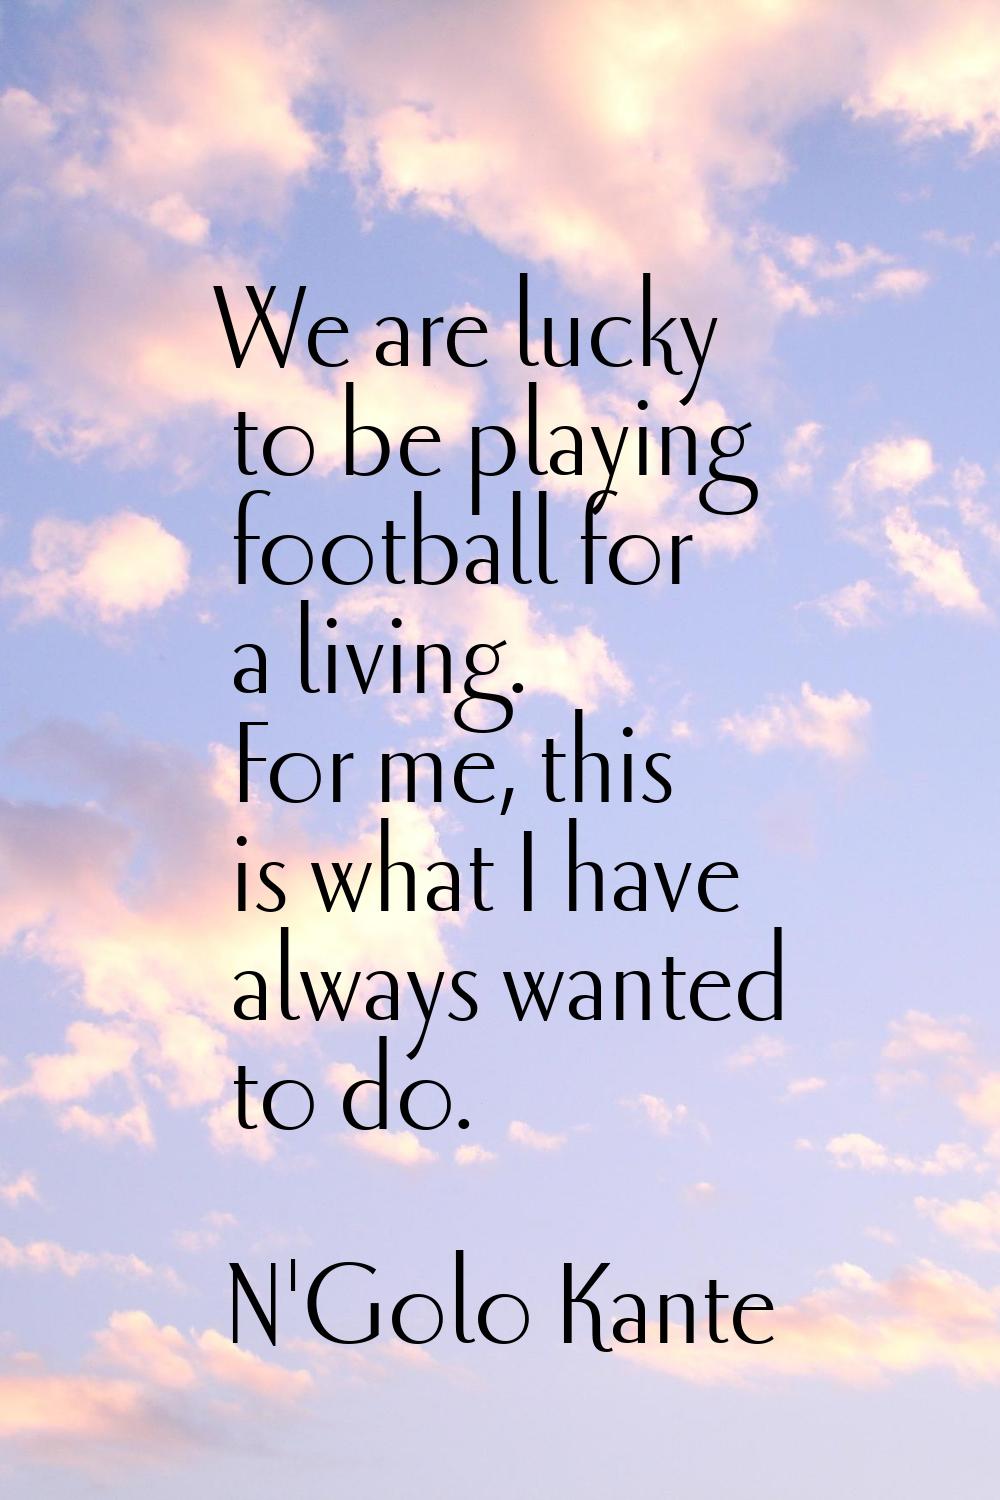 We are lucky to be playing football for a living. For me, this is what I have always wanted to do.